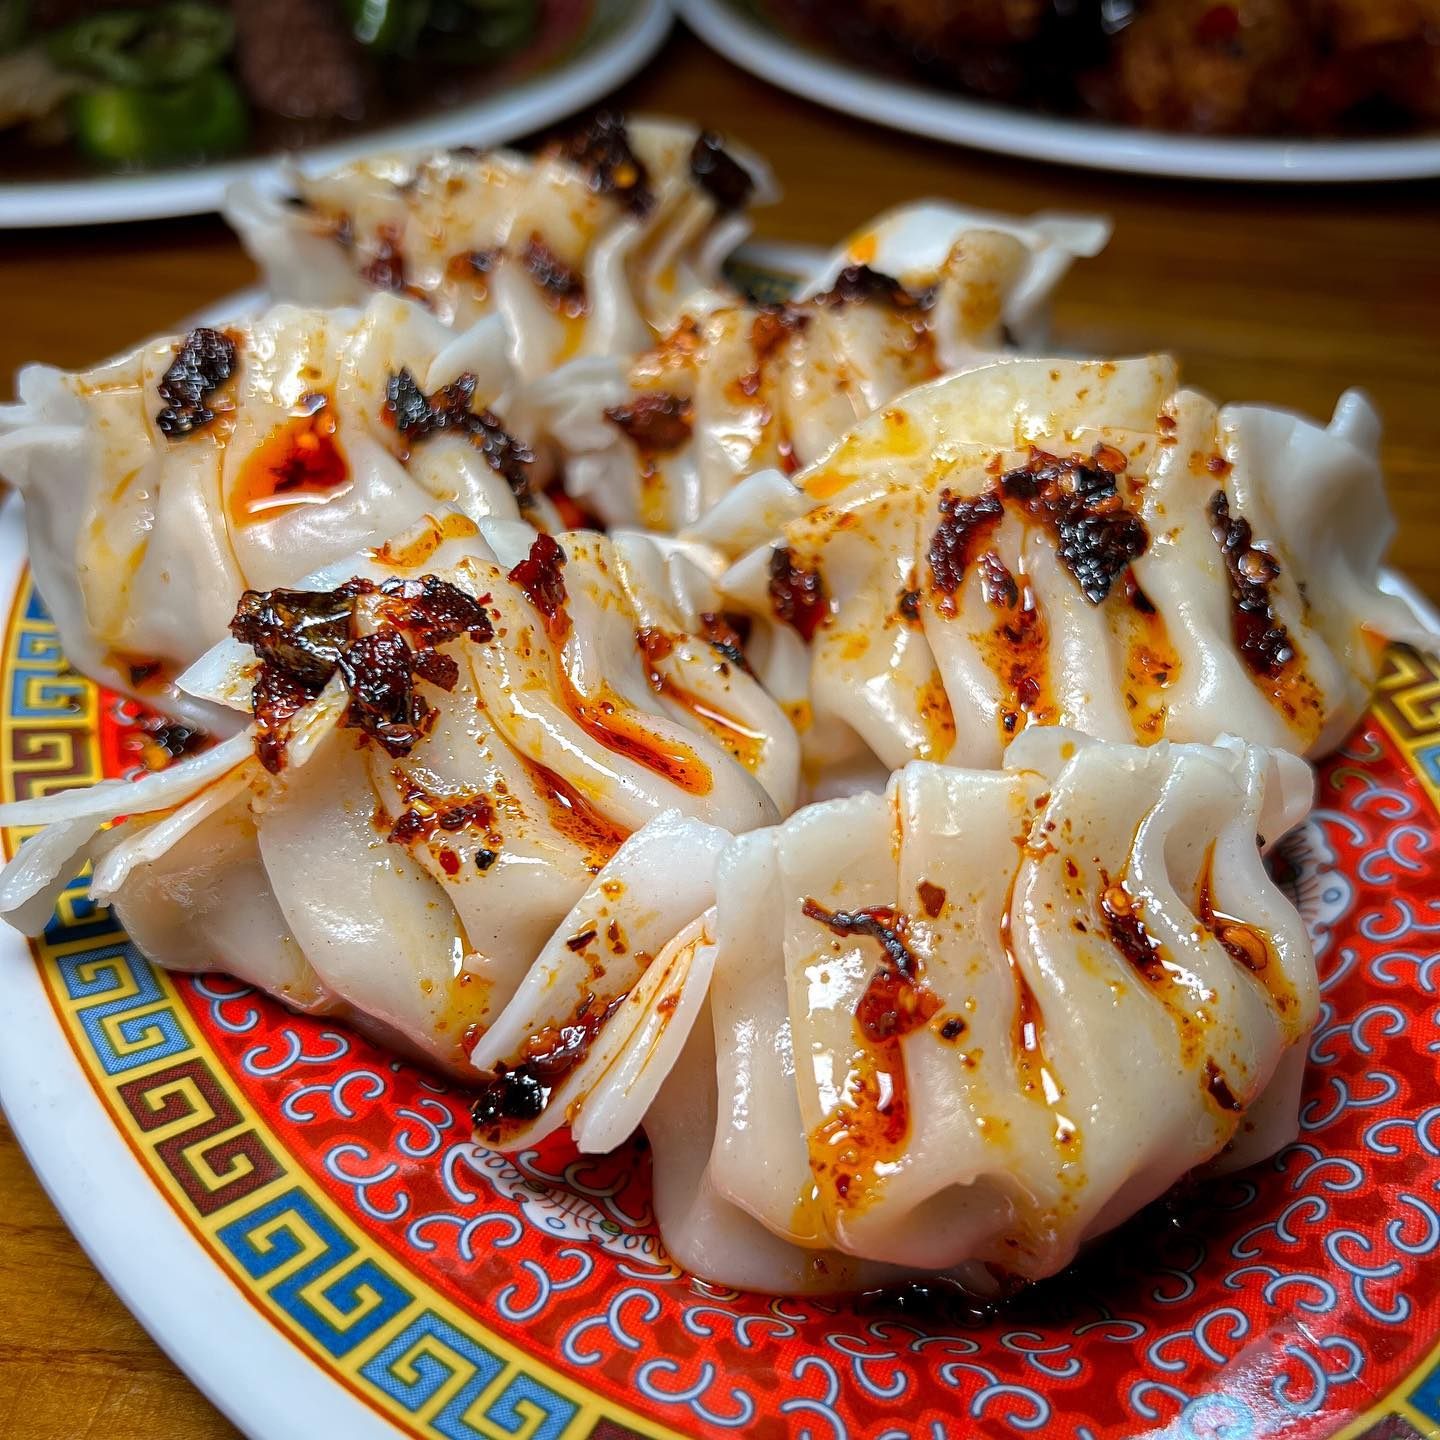 Mr. Chang's, a halal Chinese restaurant in Queens, makes a mean beef dumpling.